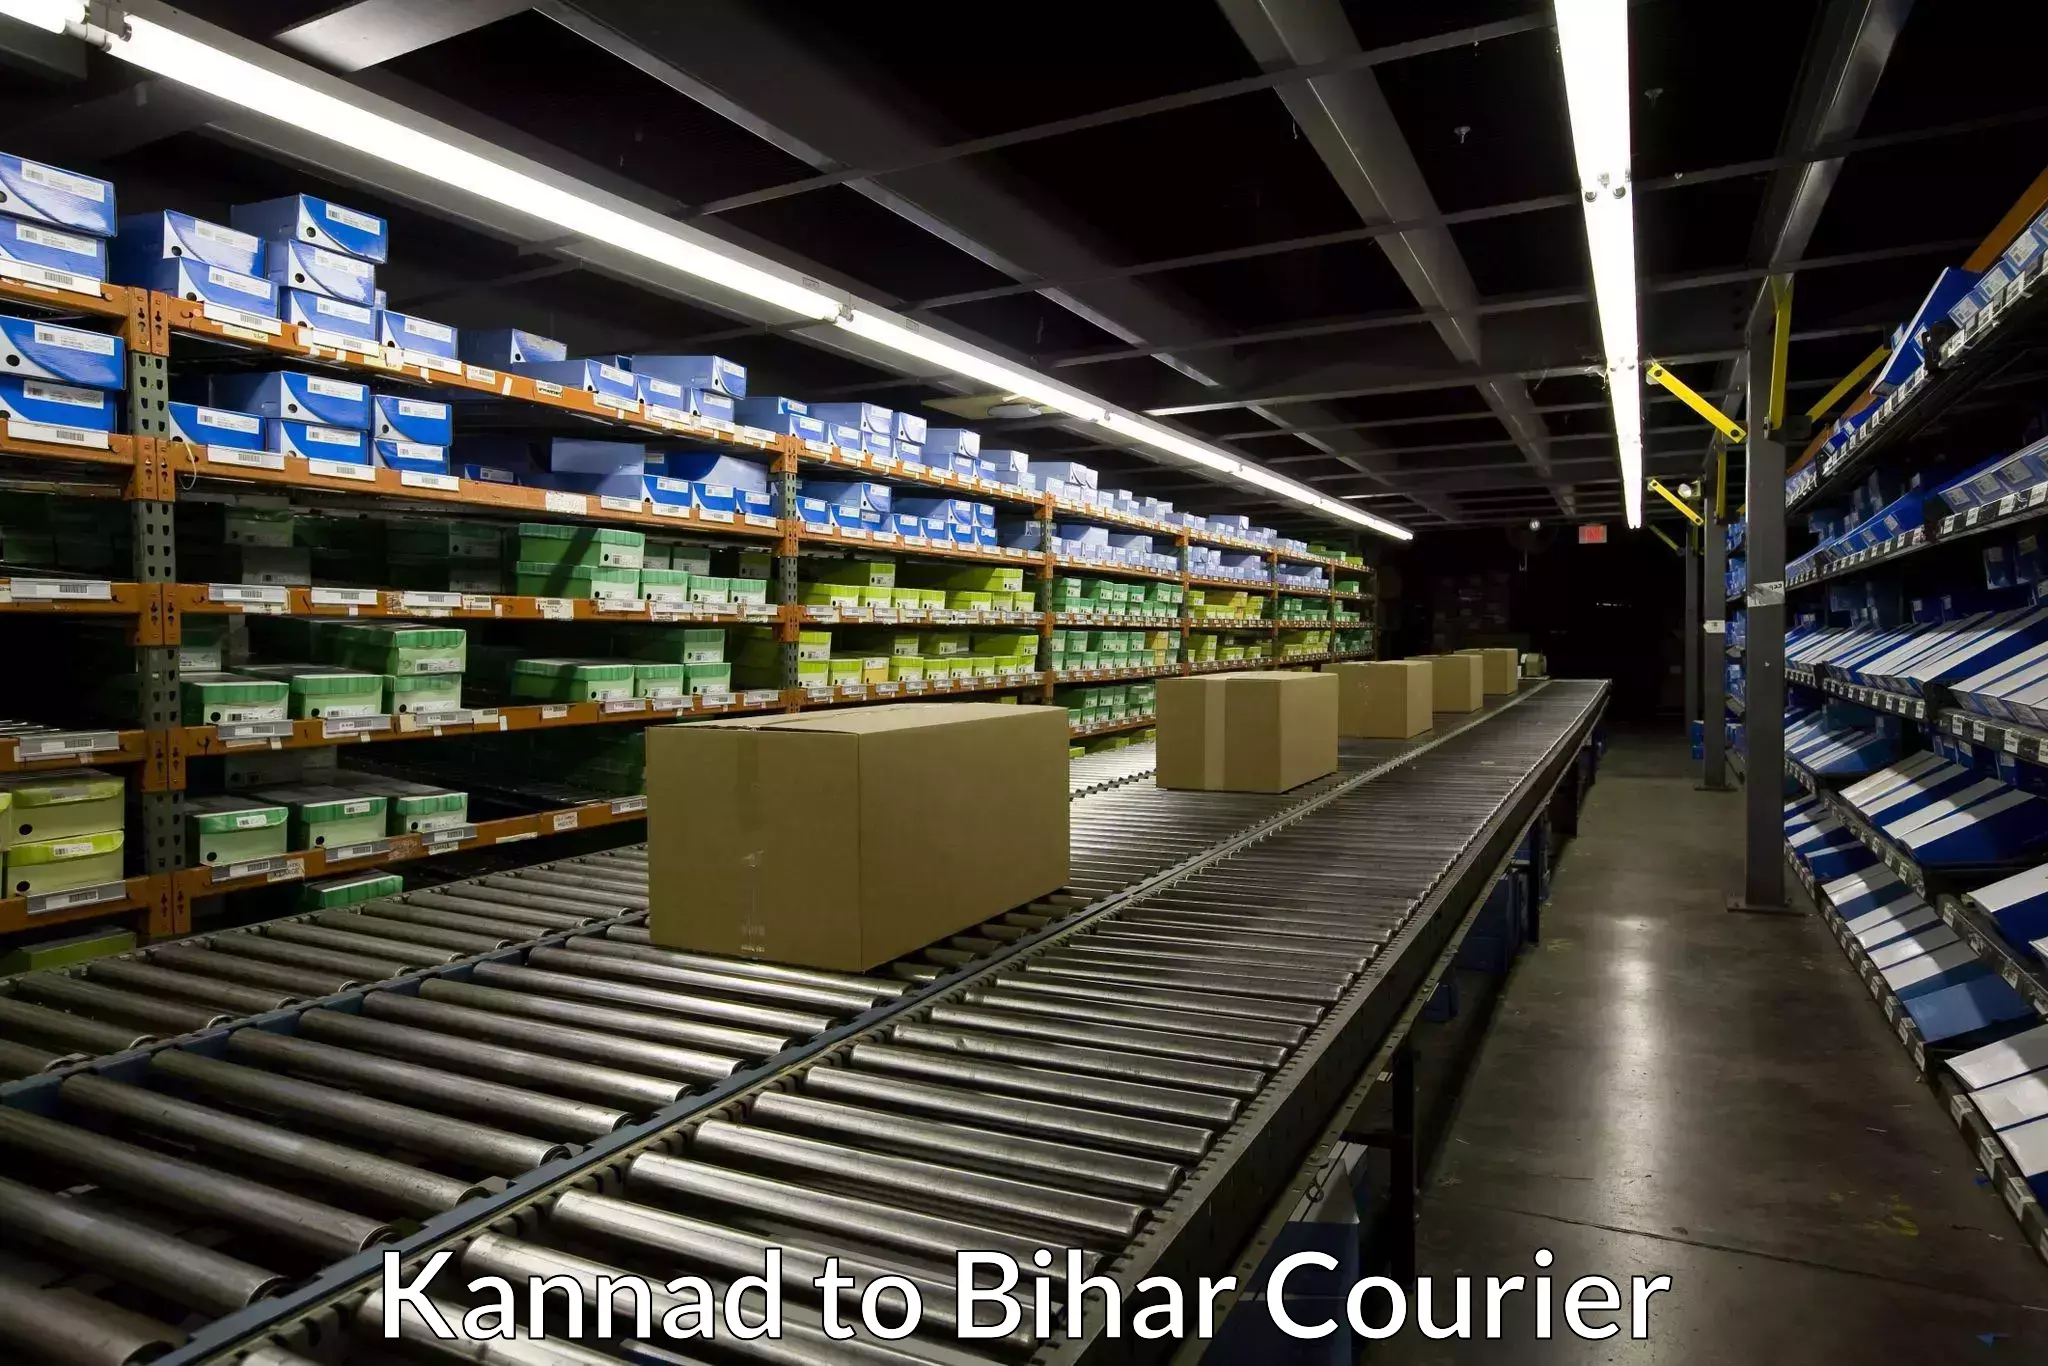 International courier networks Kannad to Biraul